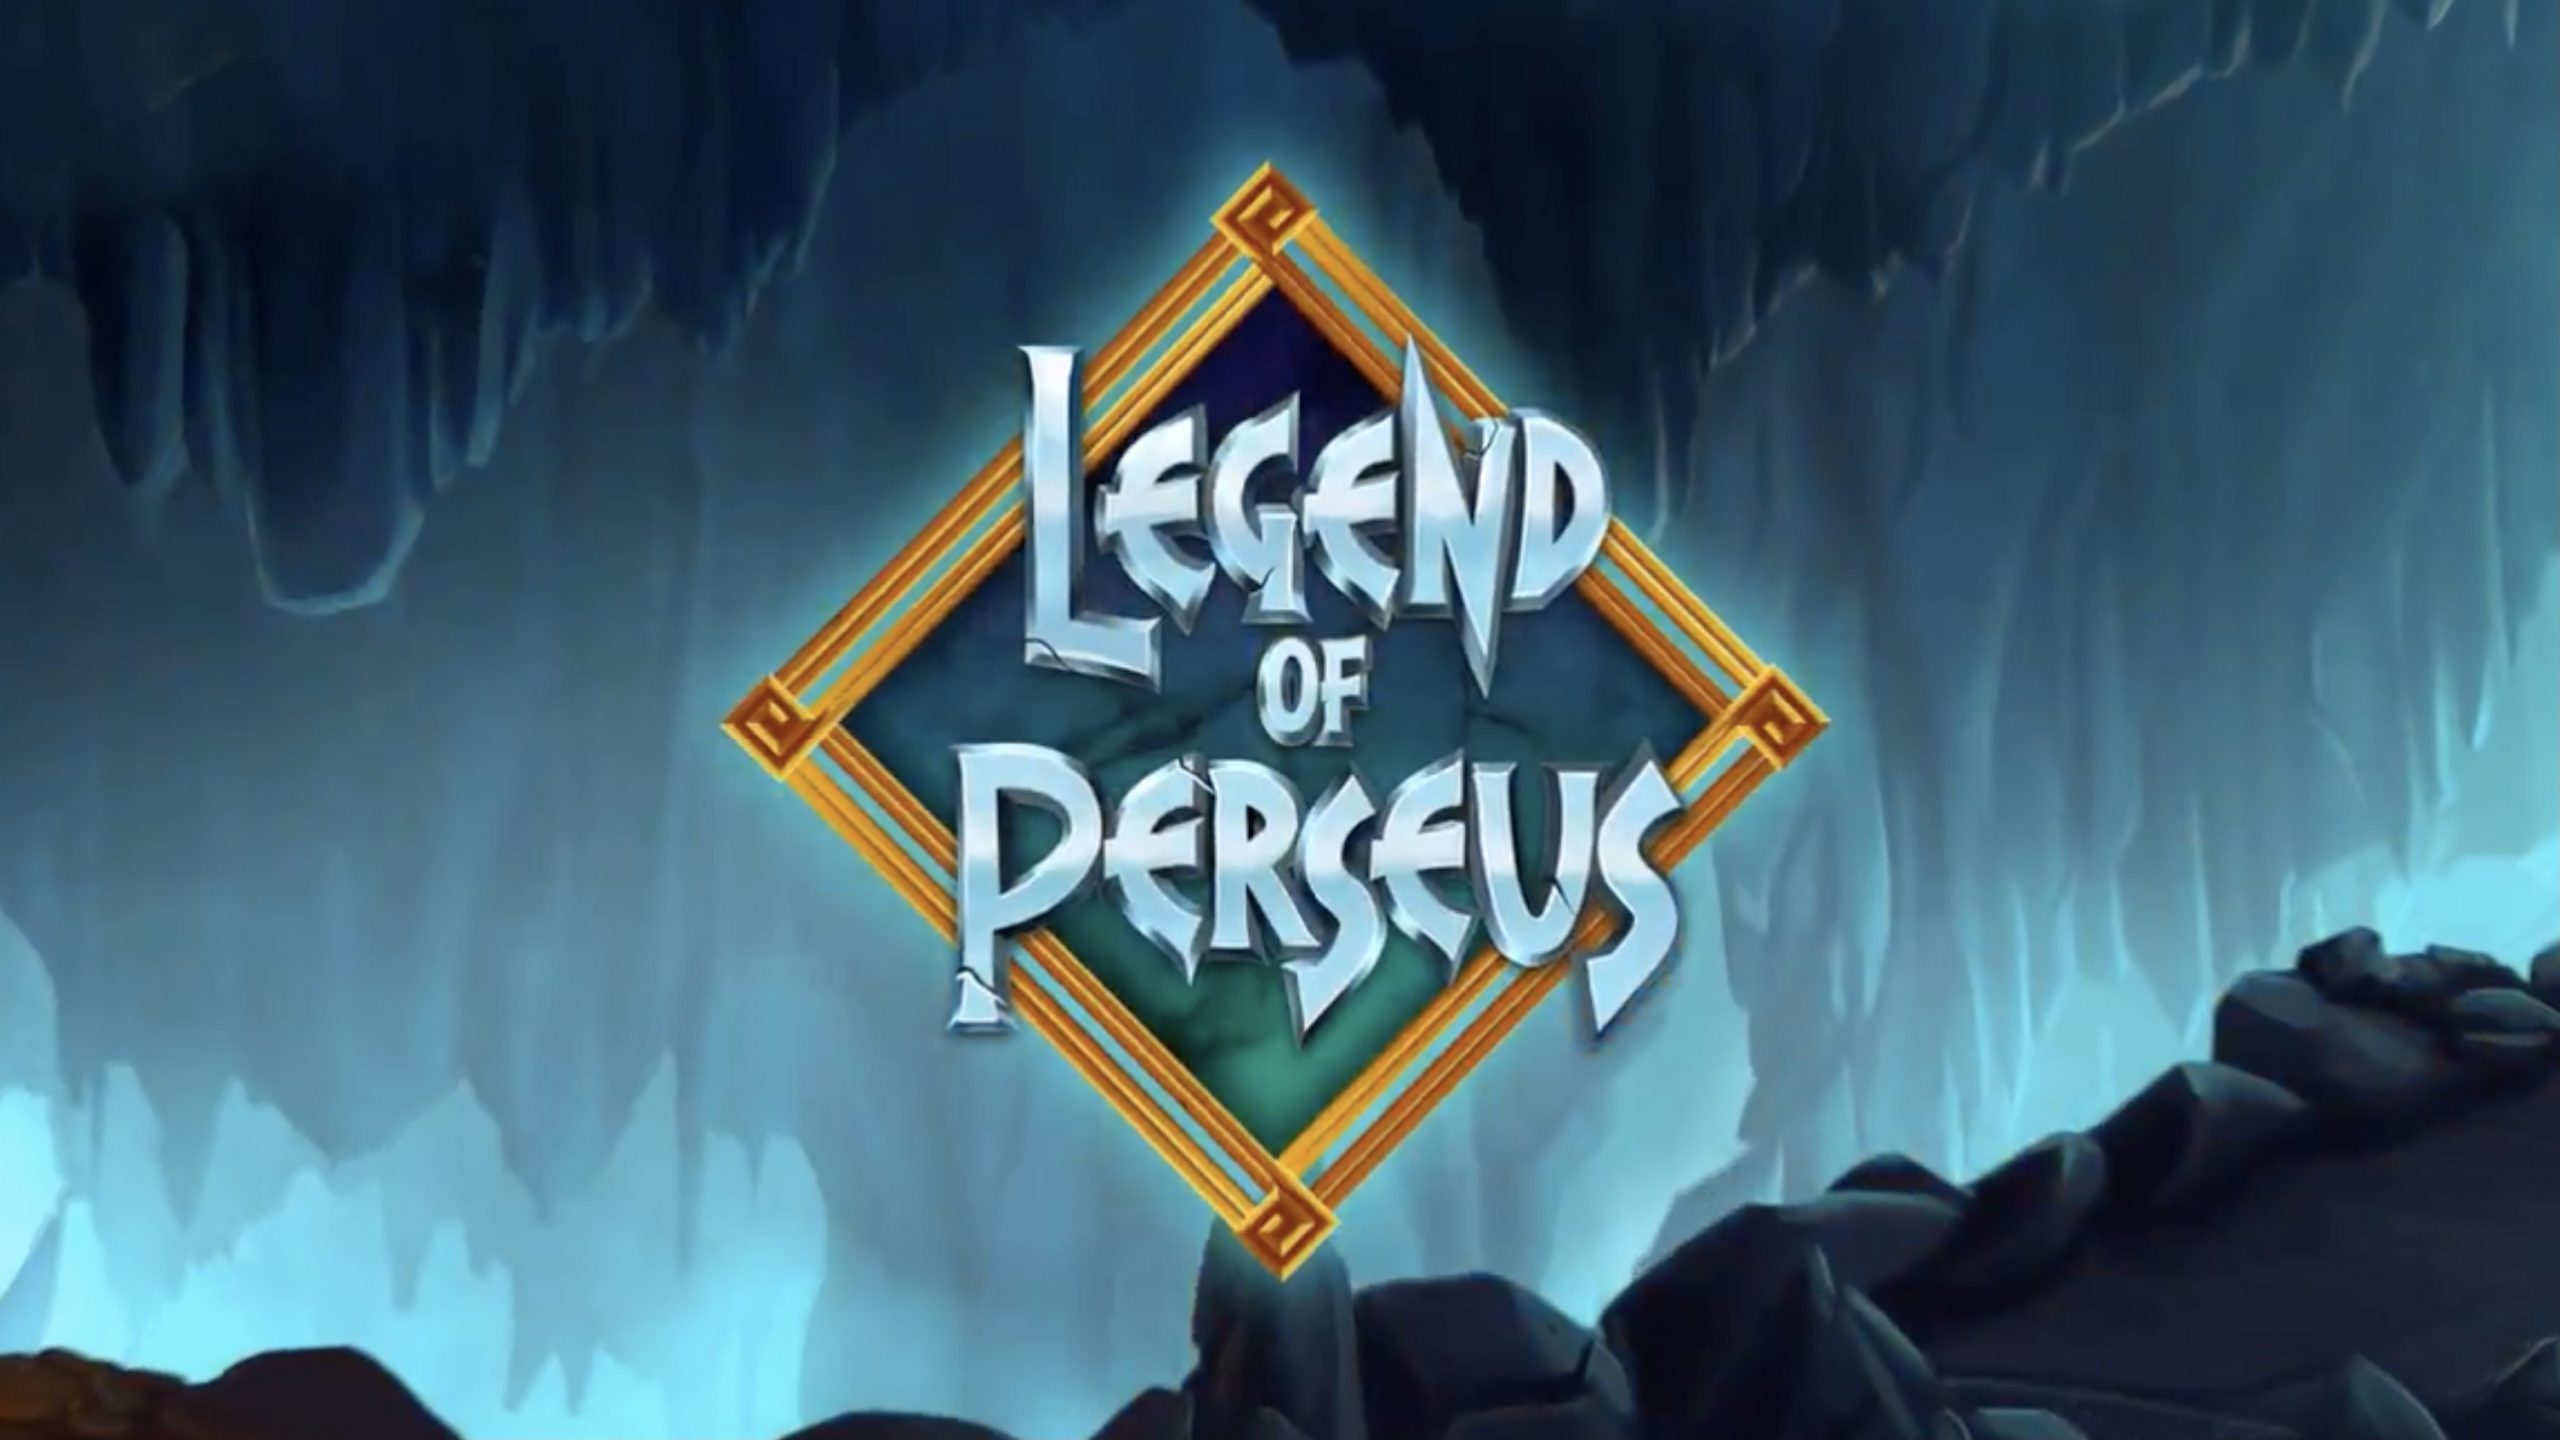 Legend of Perseus is a 5x5, all-ways-pay video slot that incorporates a maximum win potential of up to x1,250 the bet.